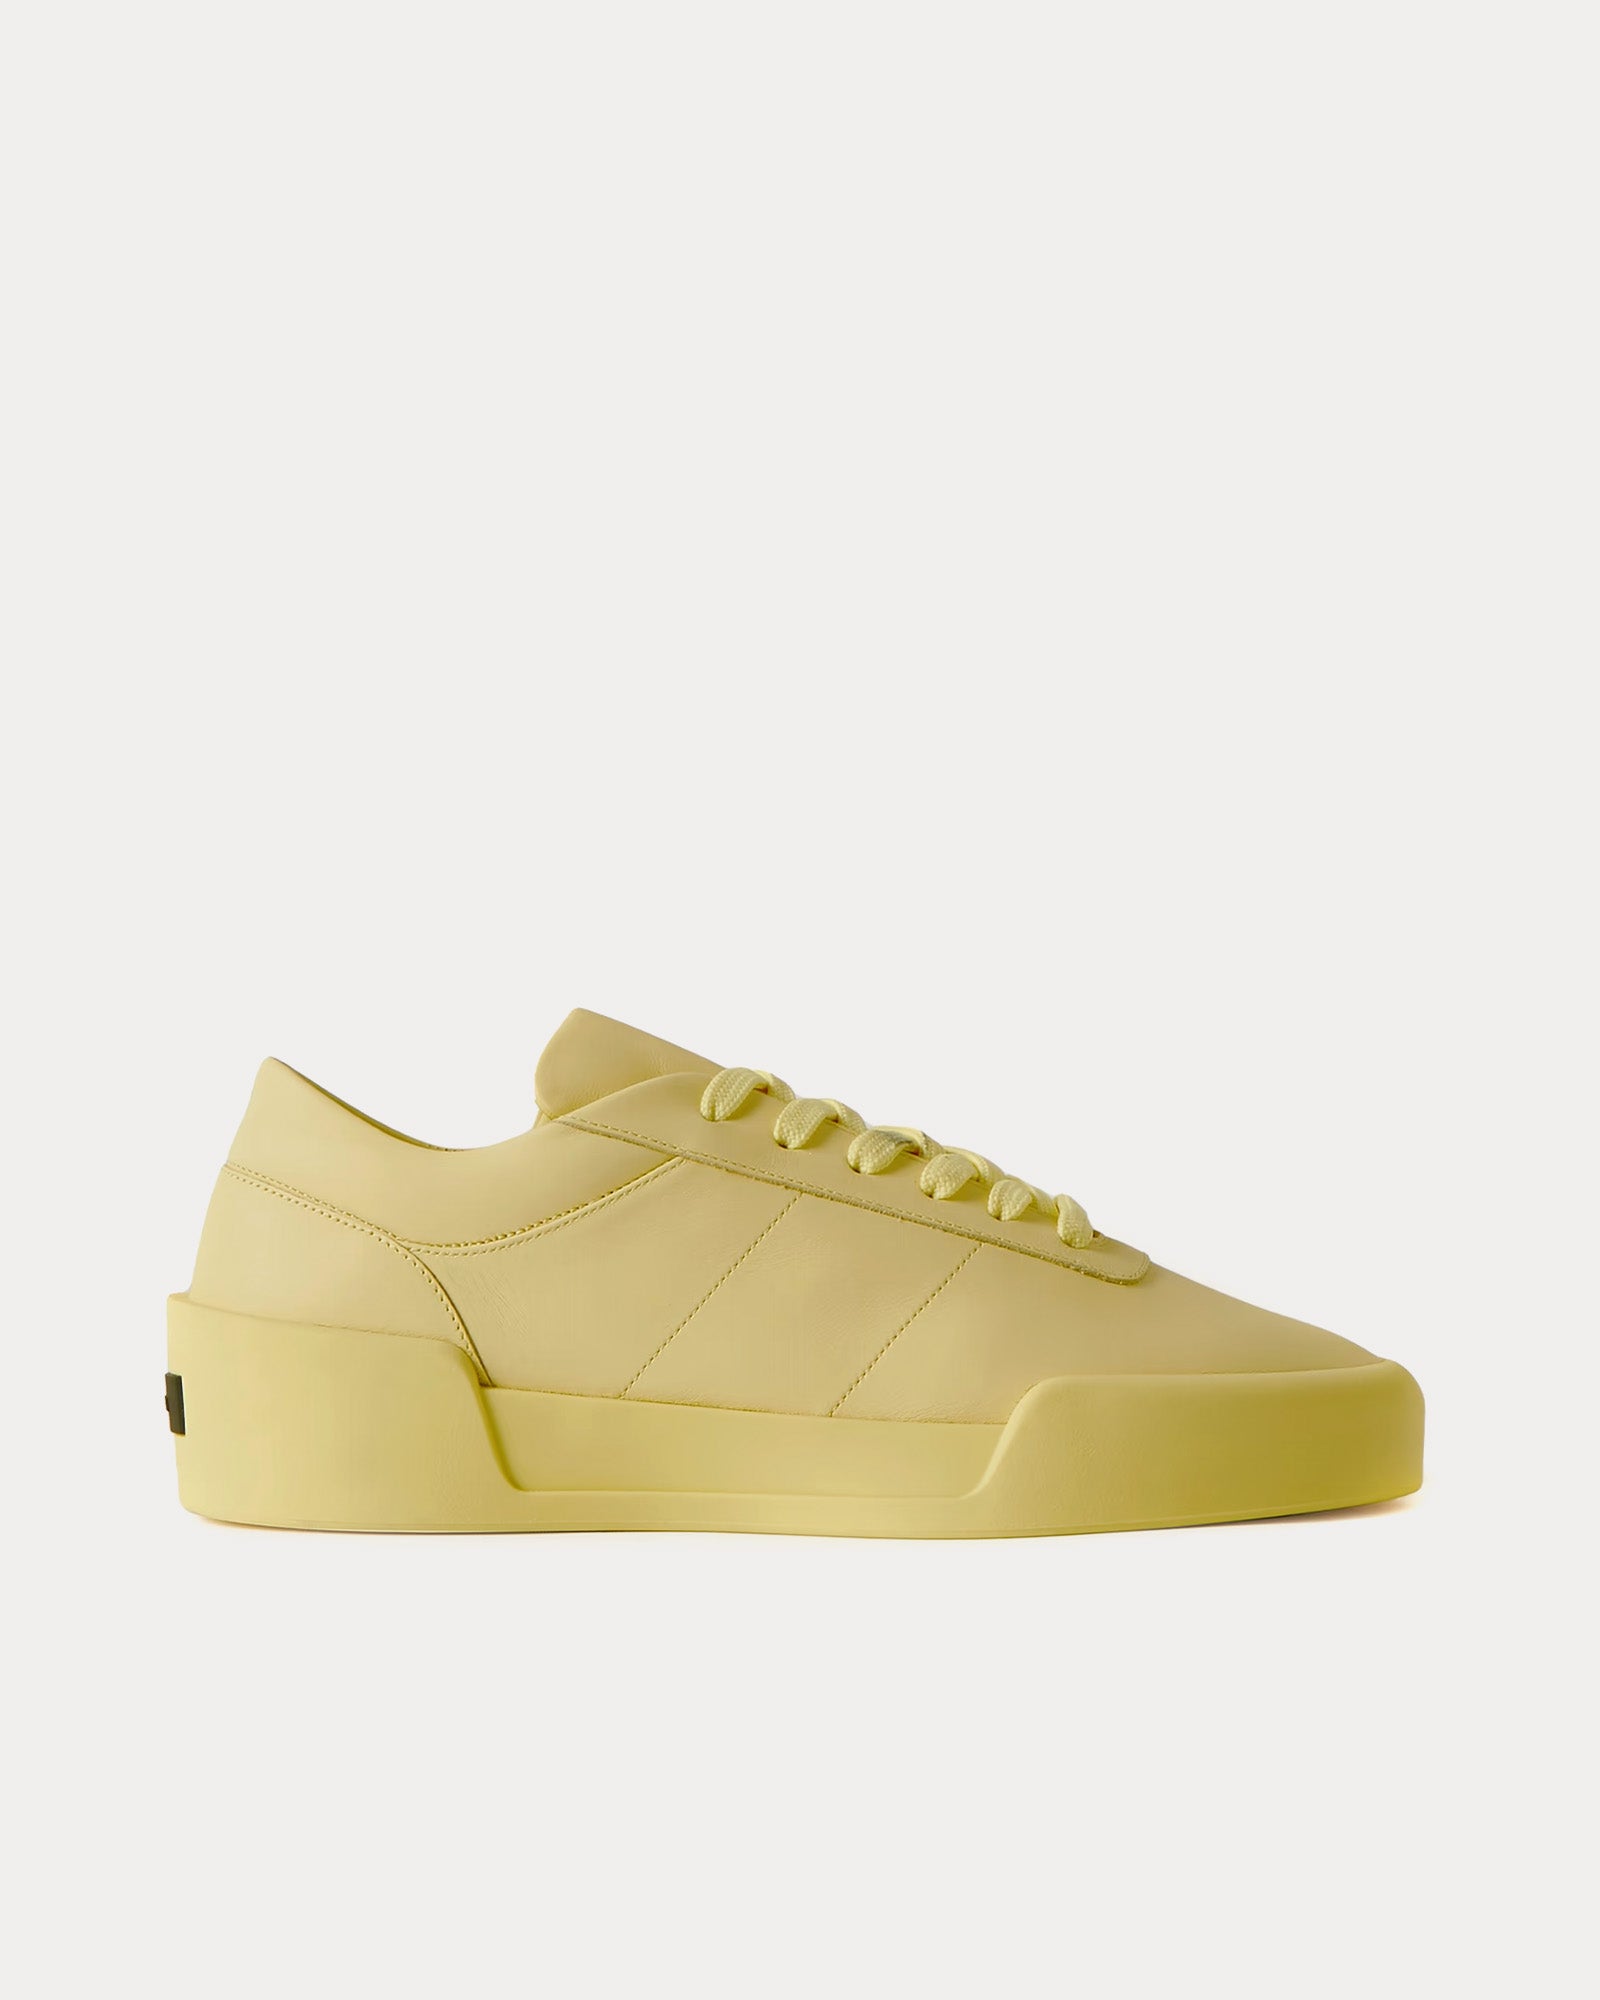 Fear of God - Aerobic Low Yellow Low Top Sneakers